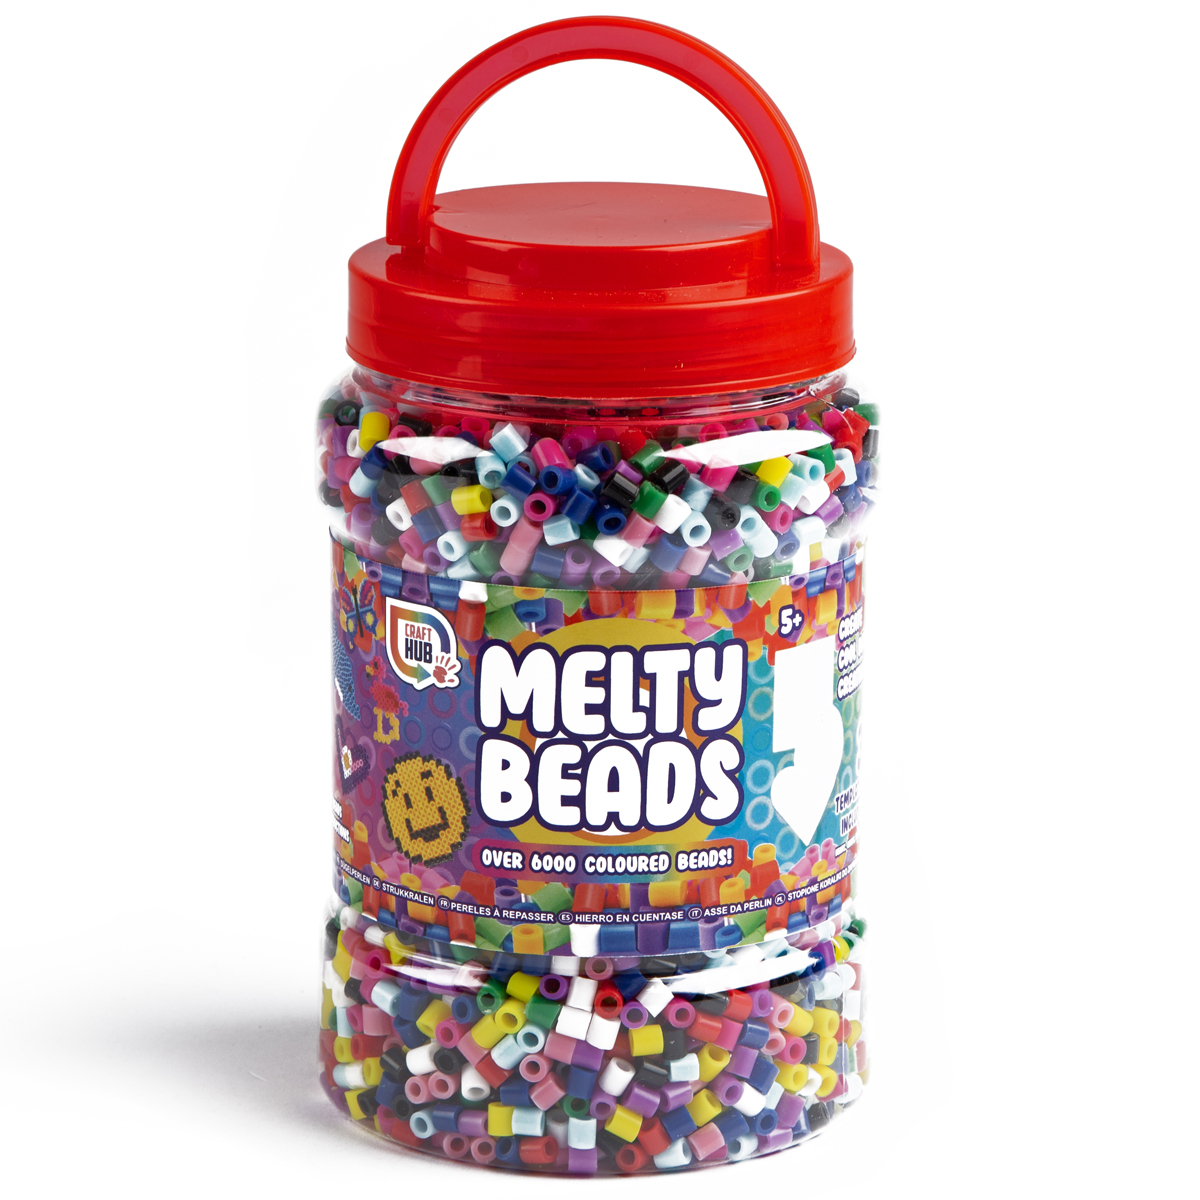 Ultimate Melty Heat & Fuse Beads 6000-Count